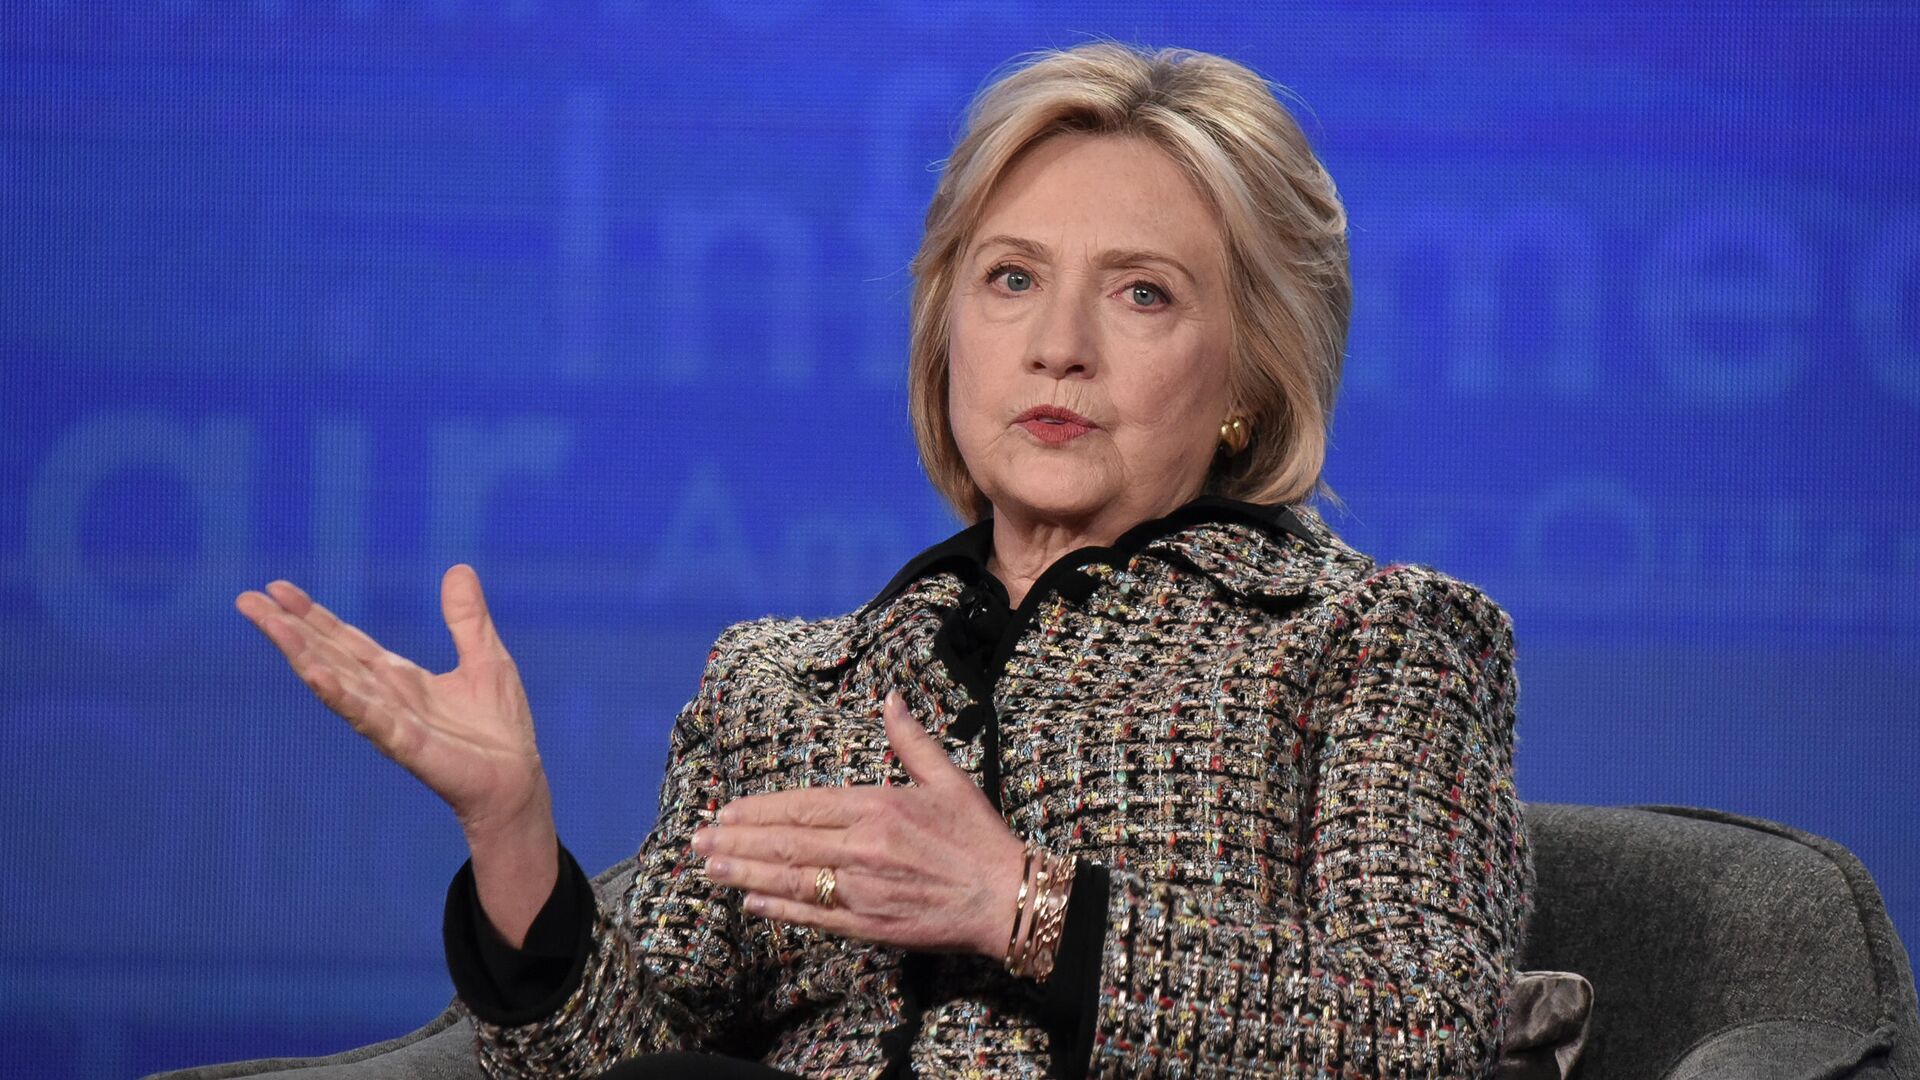 Hillary Clinton participates in the Hulu Hillary panel during the Winter 2020 Television Critics Association Press Tour, on Friday, Jan. 17, 2020, in Pasadena, Calif.  - Sputnik International, 1920, 14.02.2022